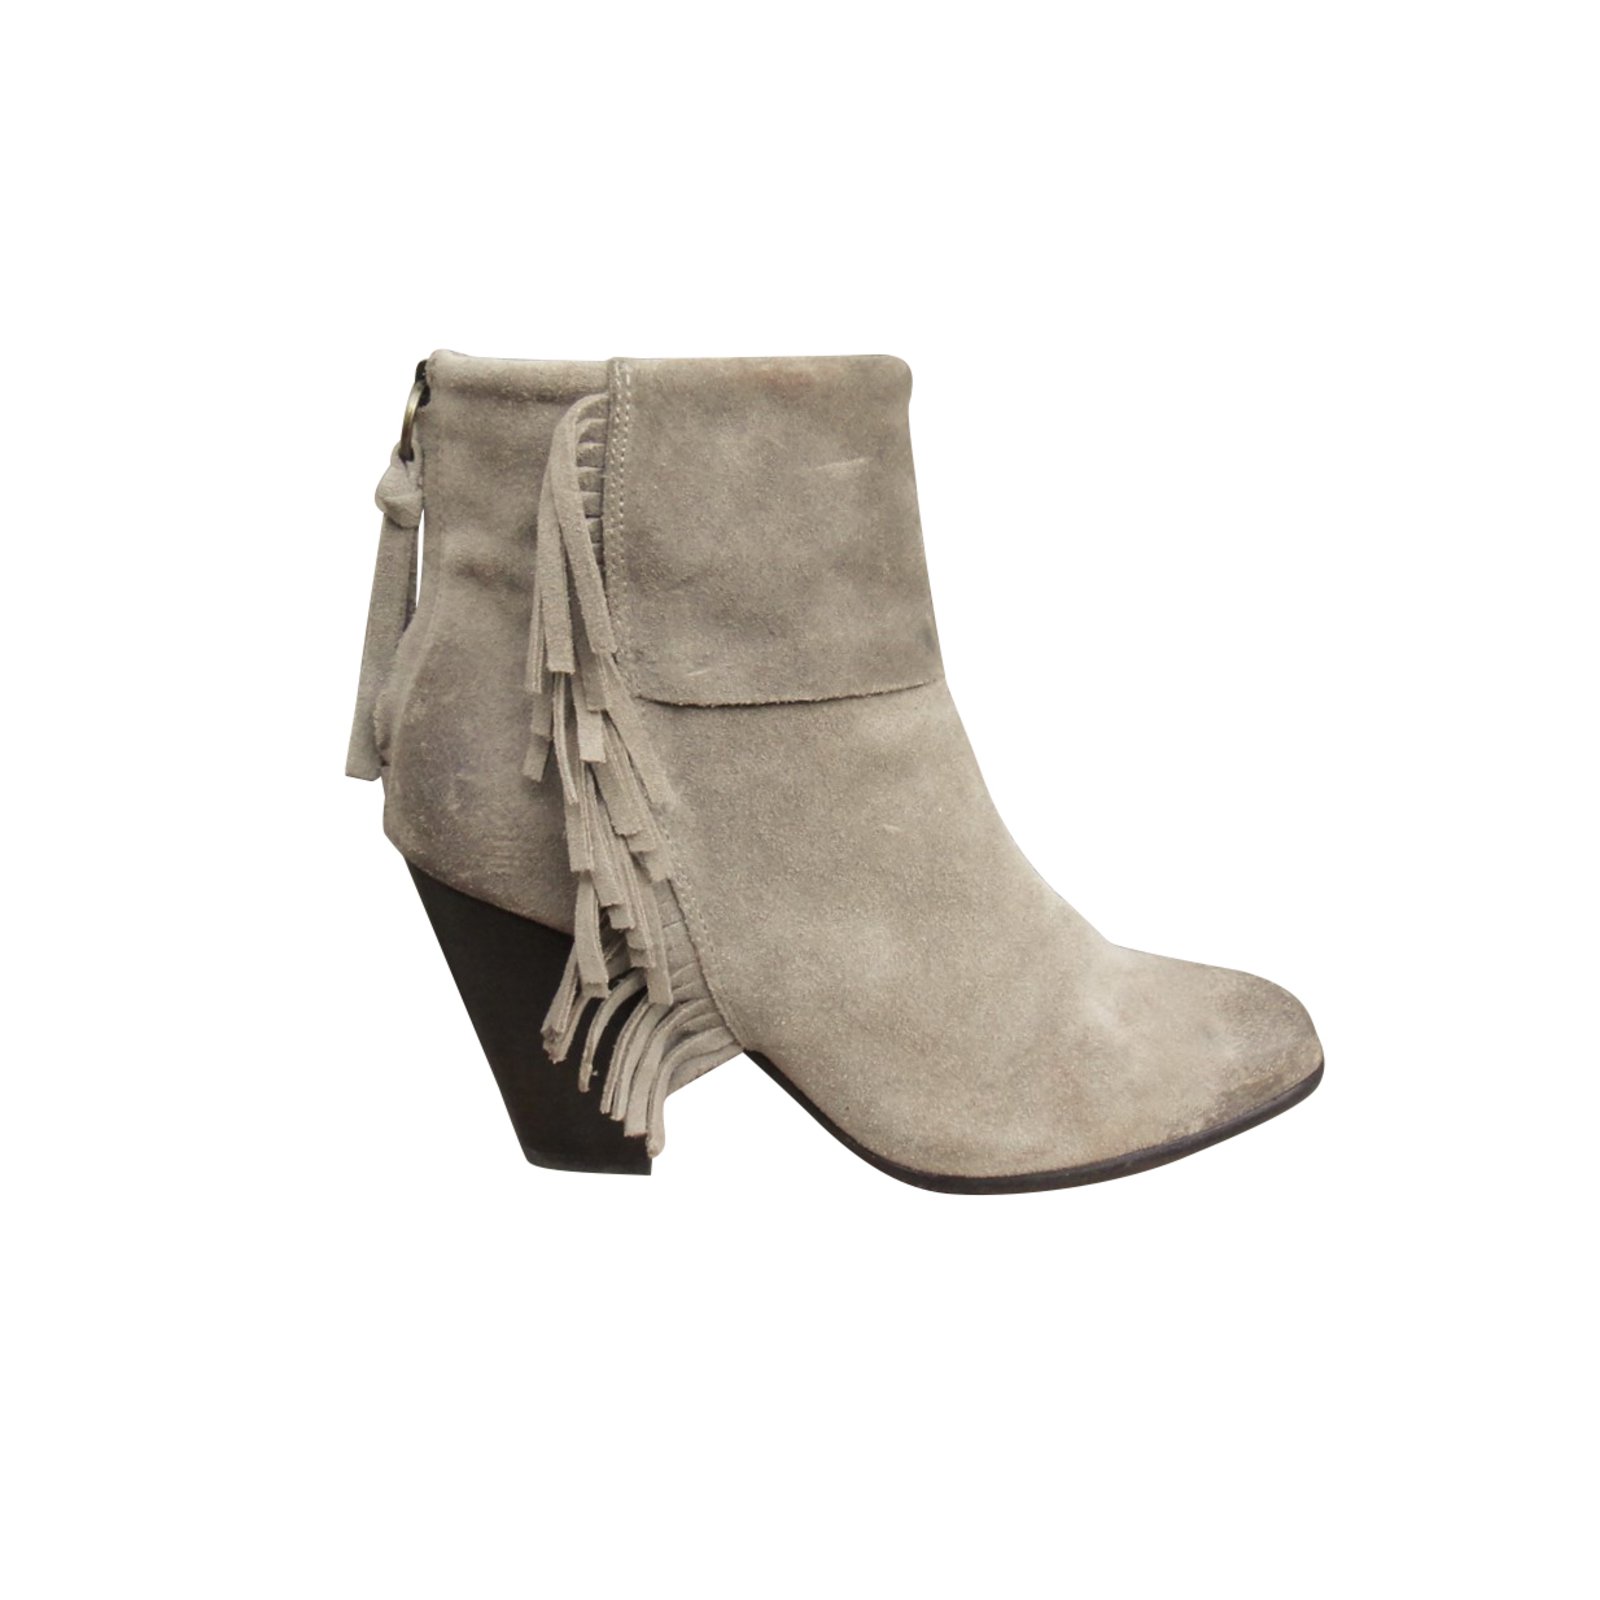 Ash Ash fringed boots Ankle Boots 